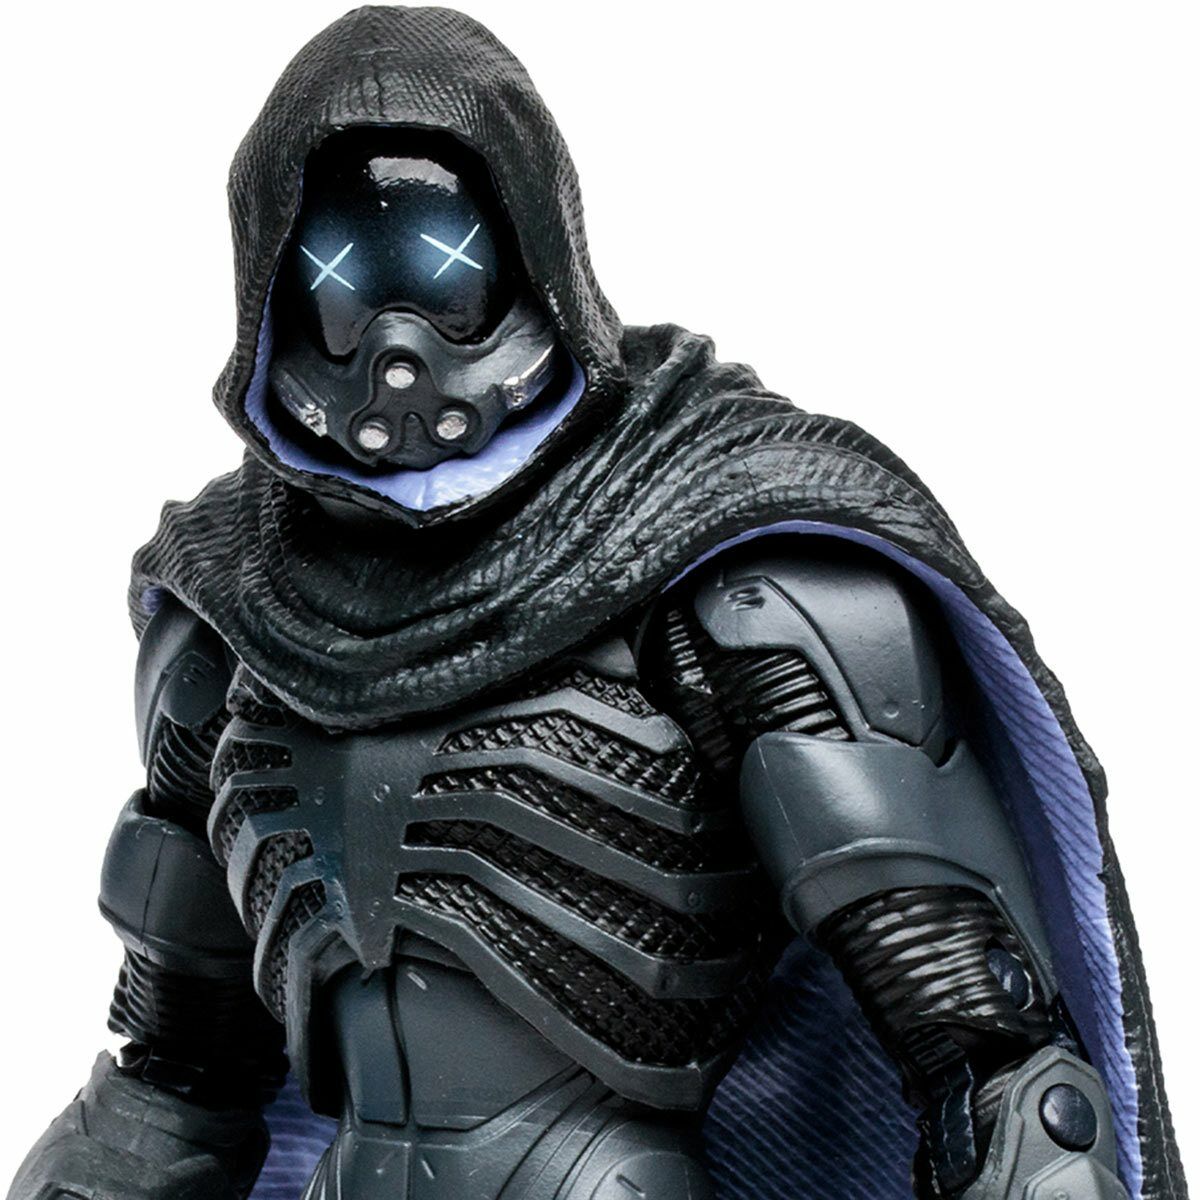 DC Multiverse McFarlane Collector Edition: Abyss (Batman vs. Abyss) Aksiyon Figür